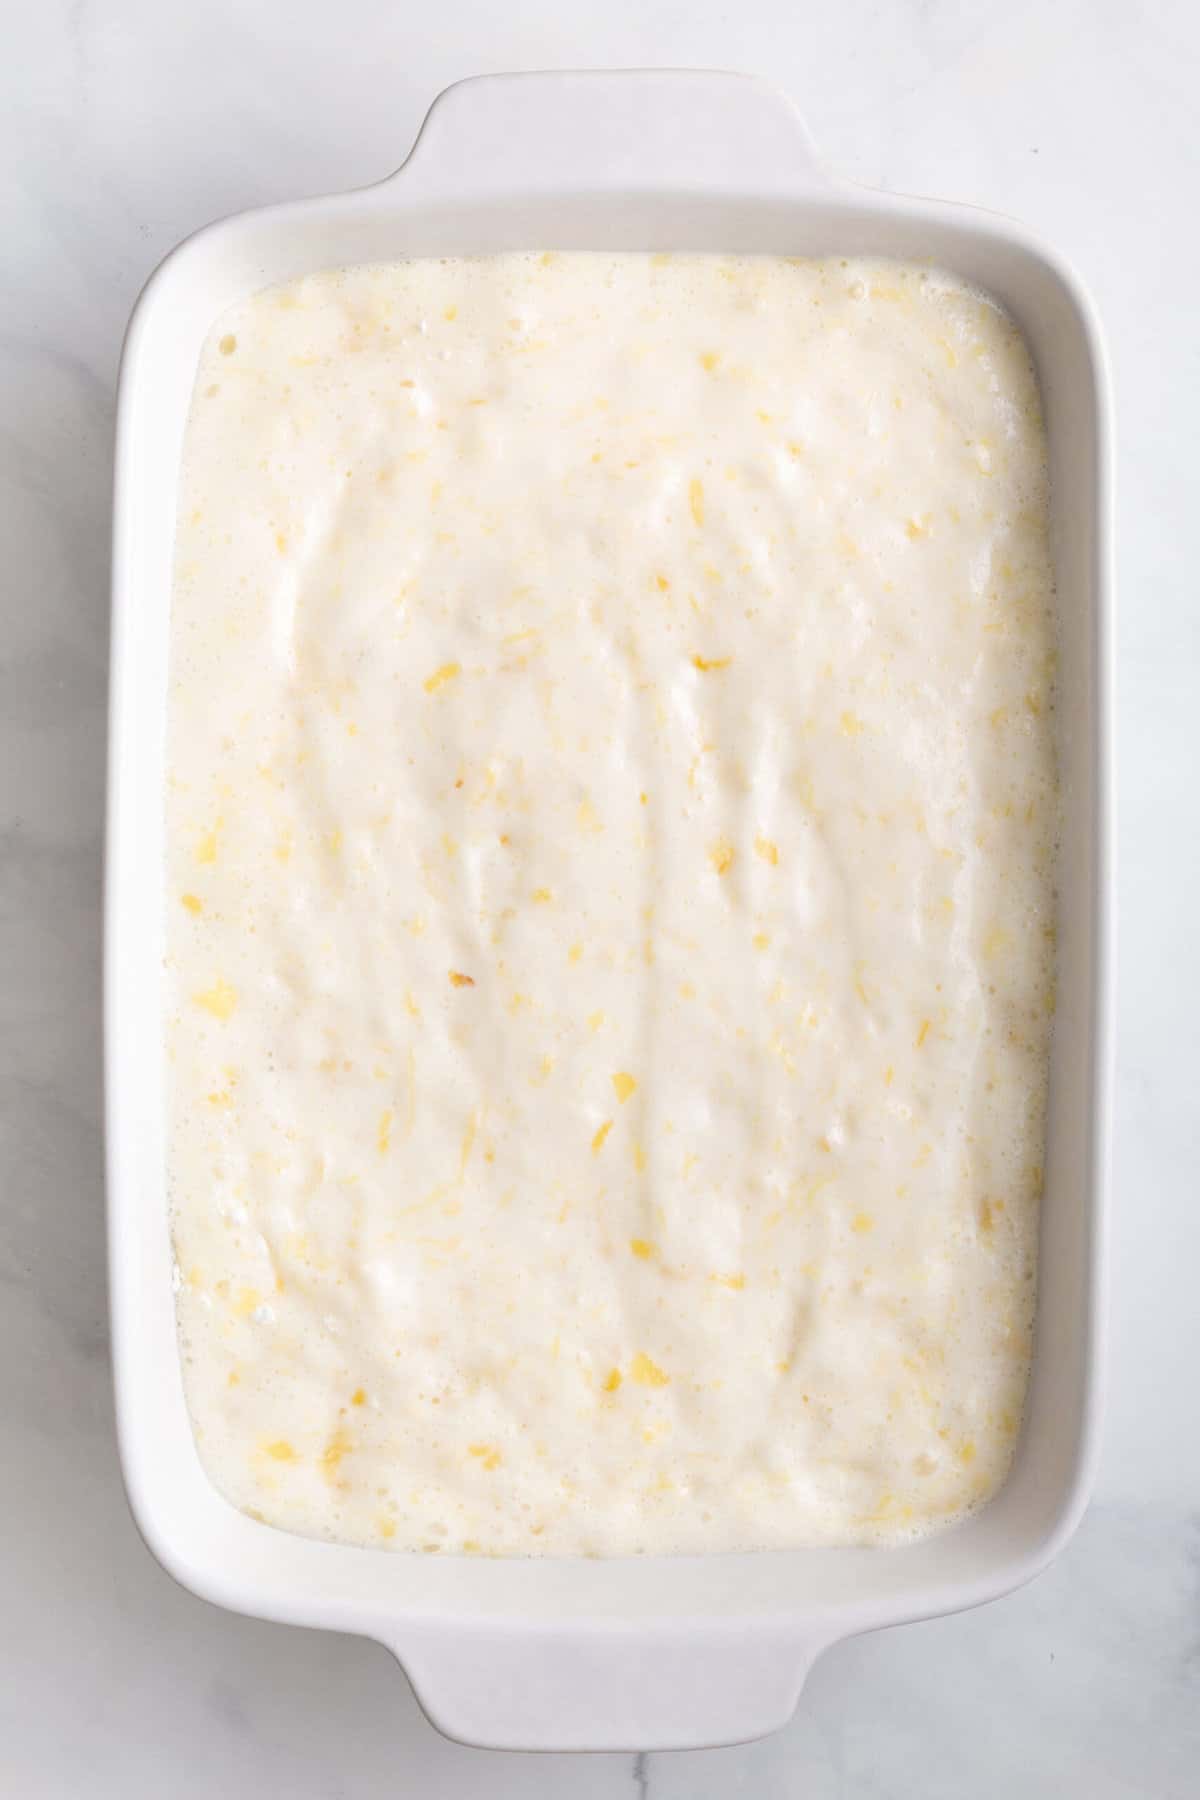 pineapple angel food cake batter sitting in a 9x13 baking dish